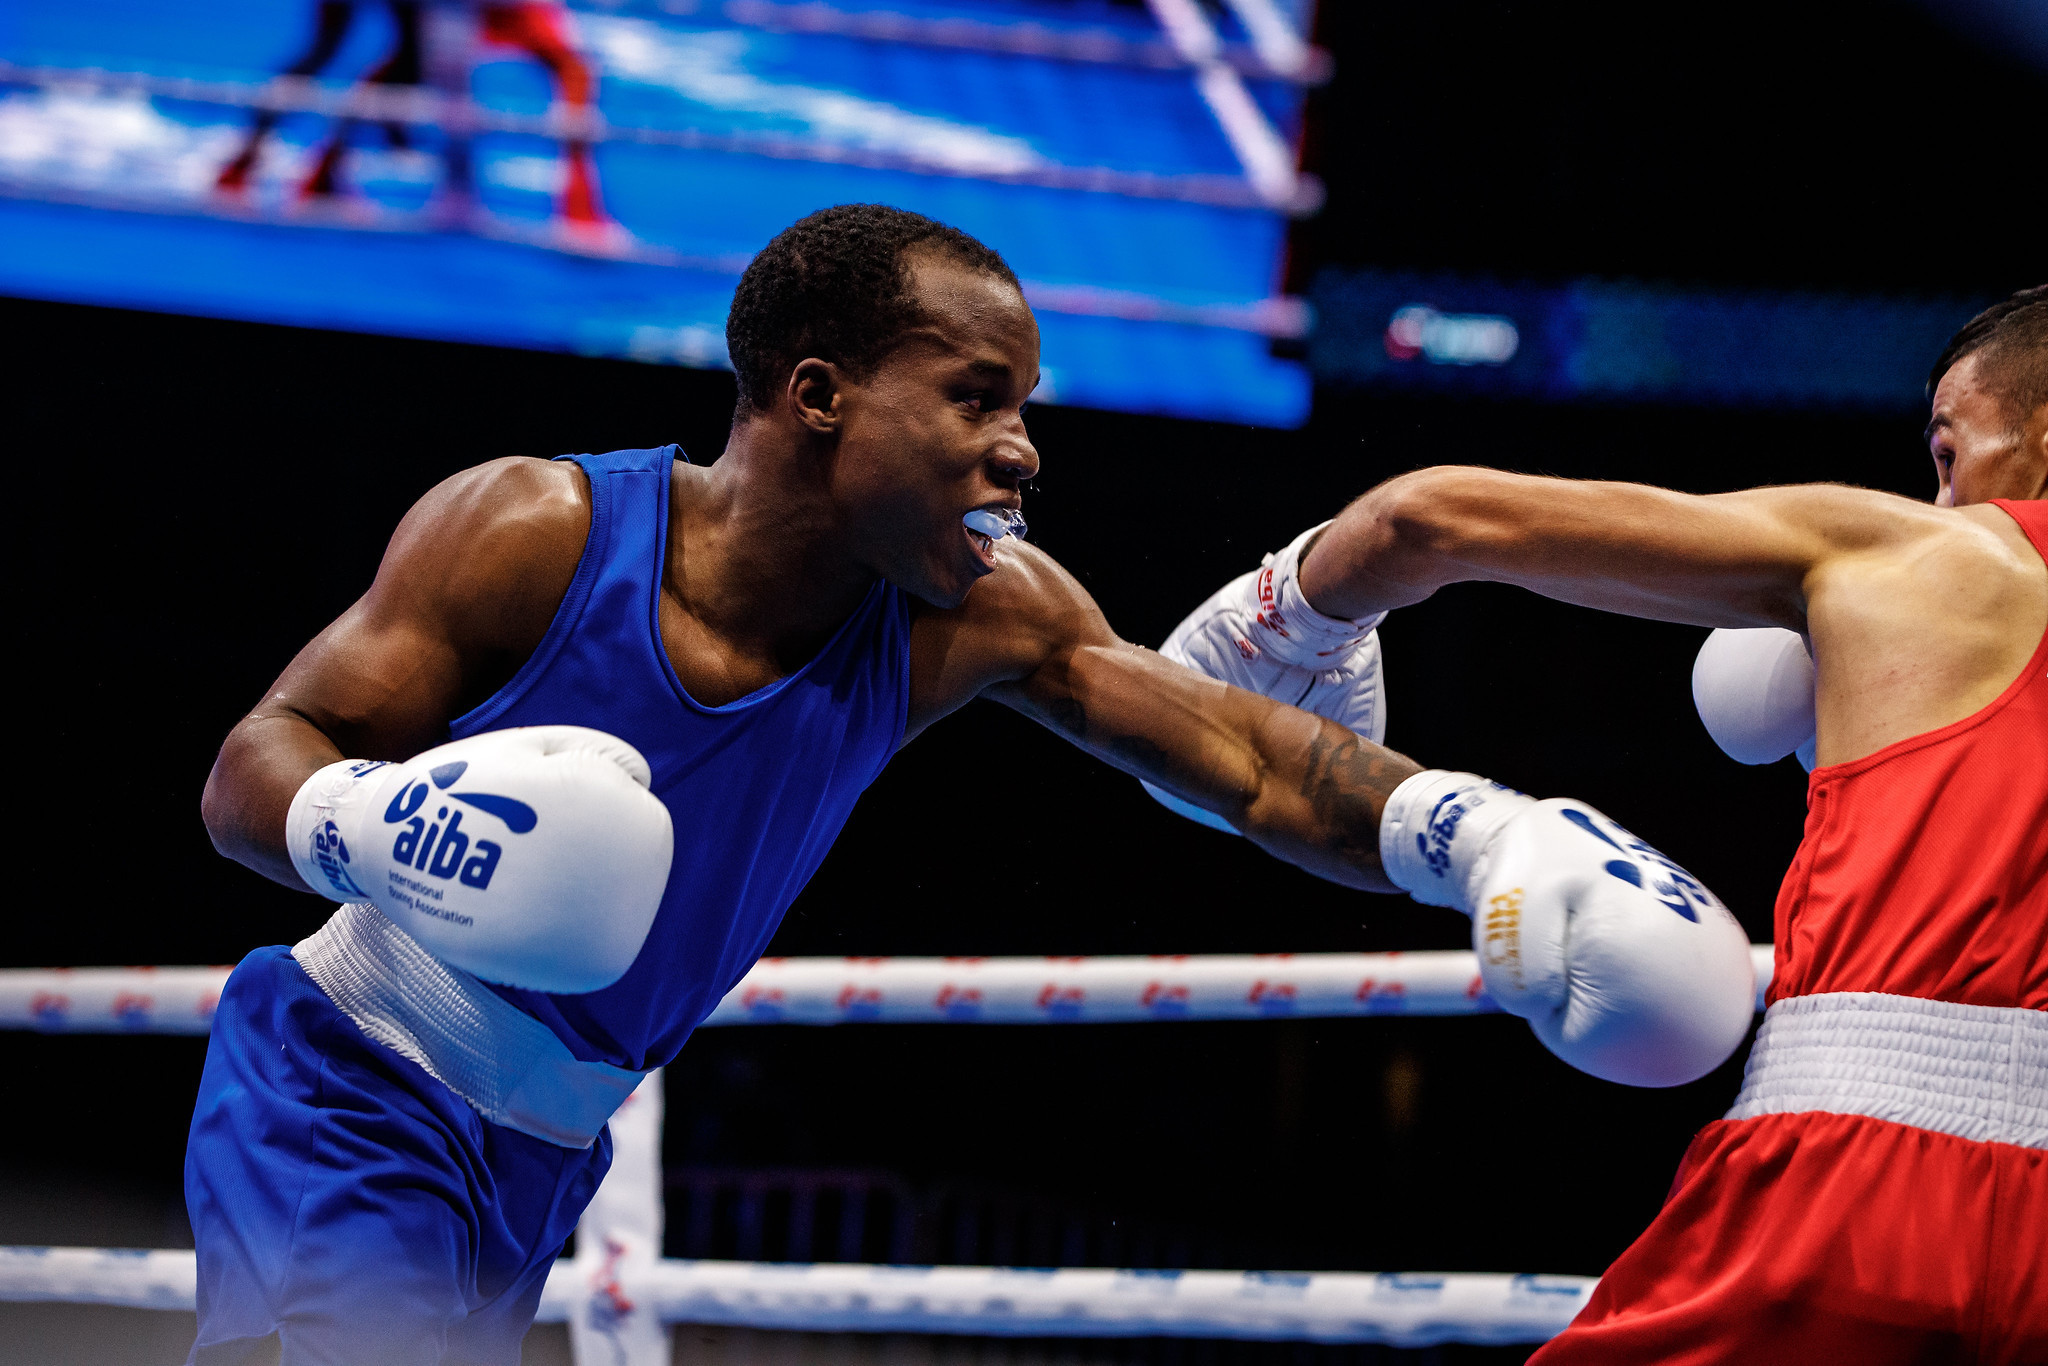 Jabali Breedy is targeting gold in the under-54kg ©AIBA